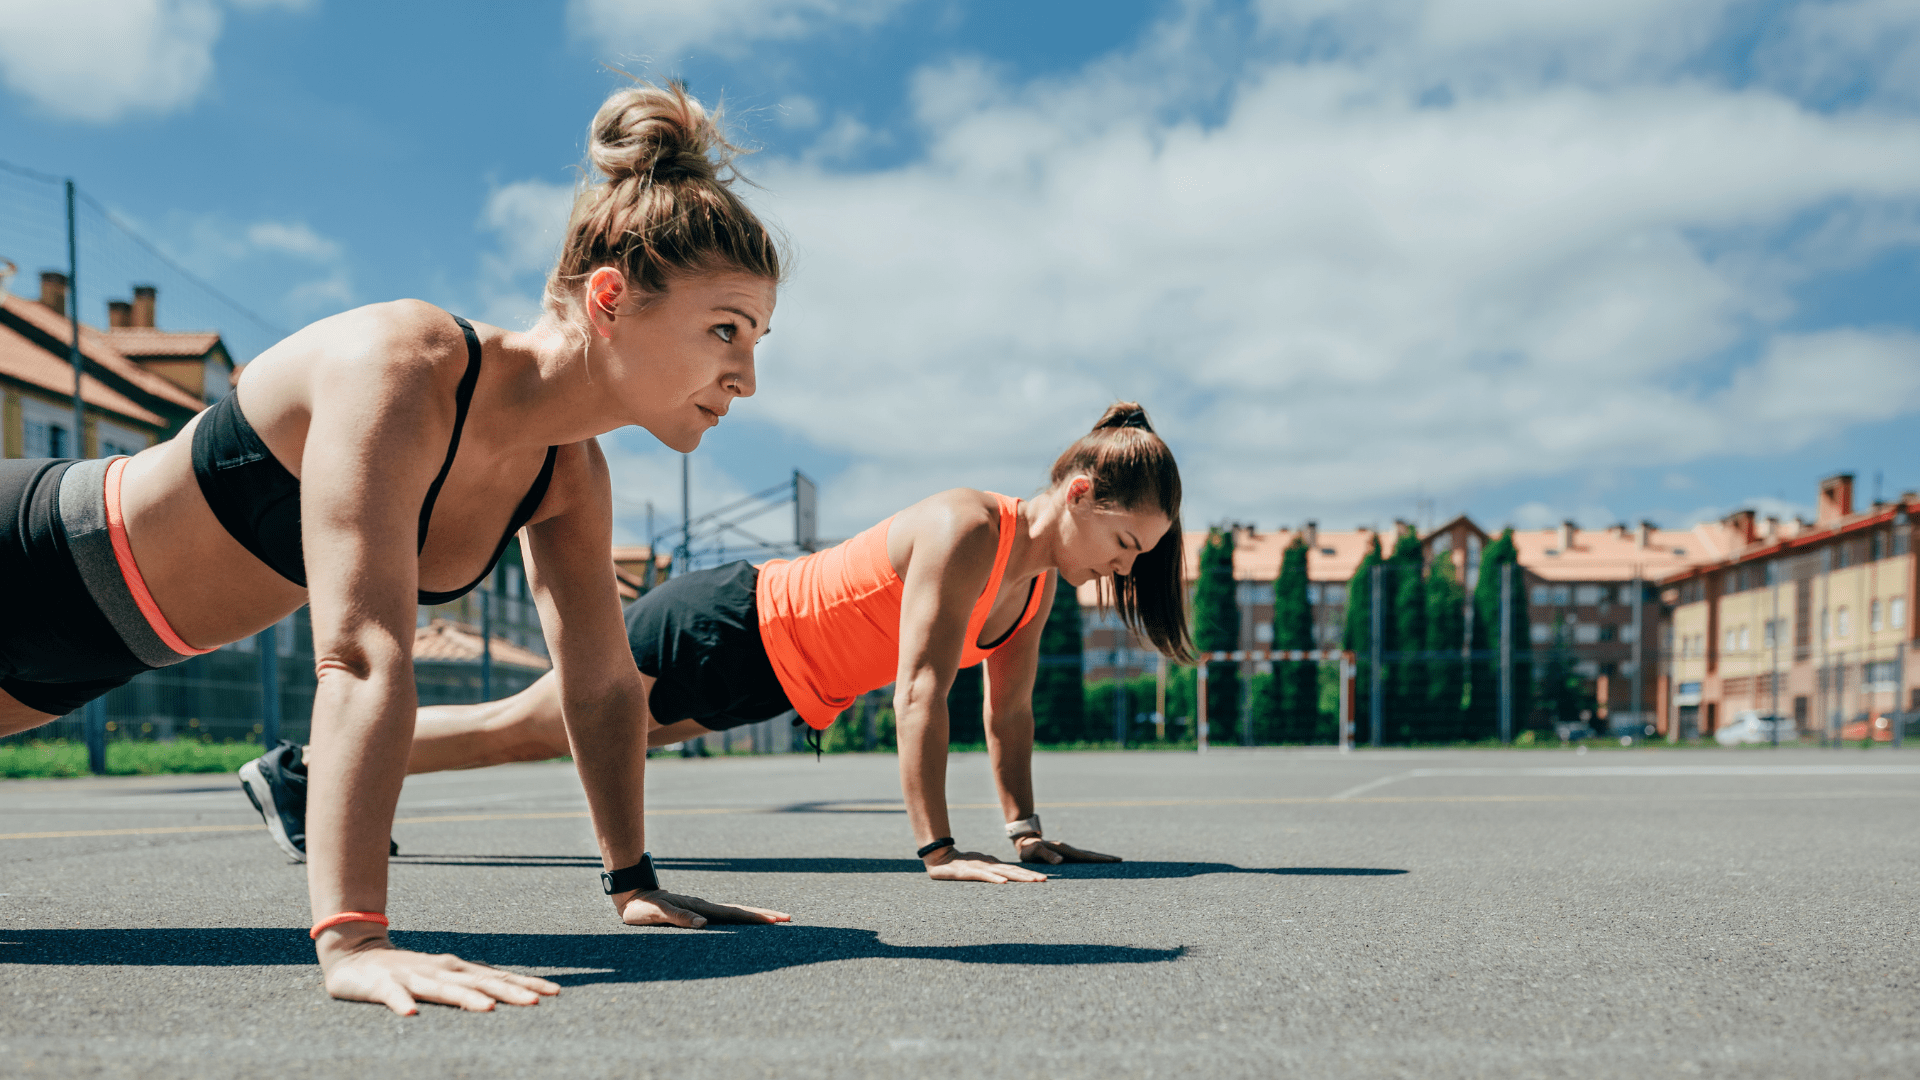 Pushups for Women - The Ultimate Progression